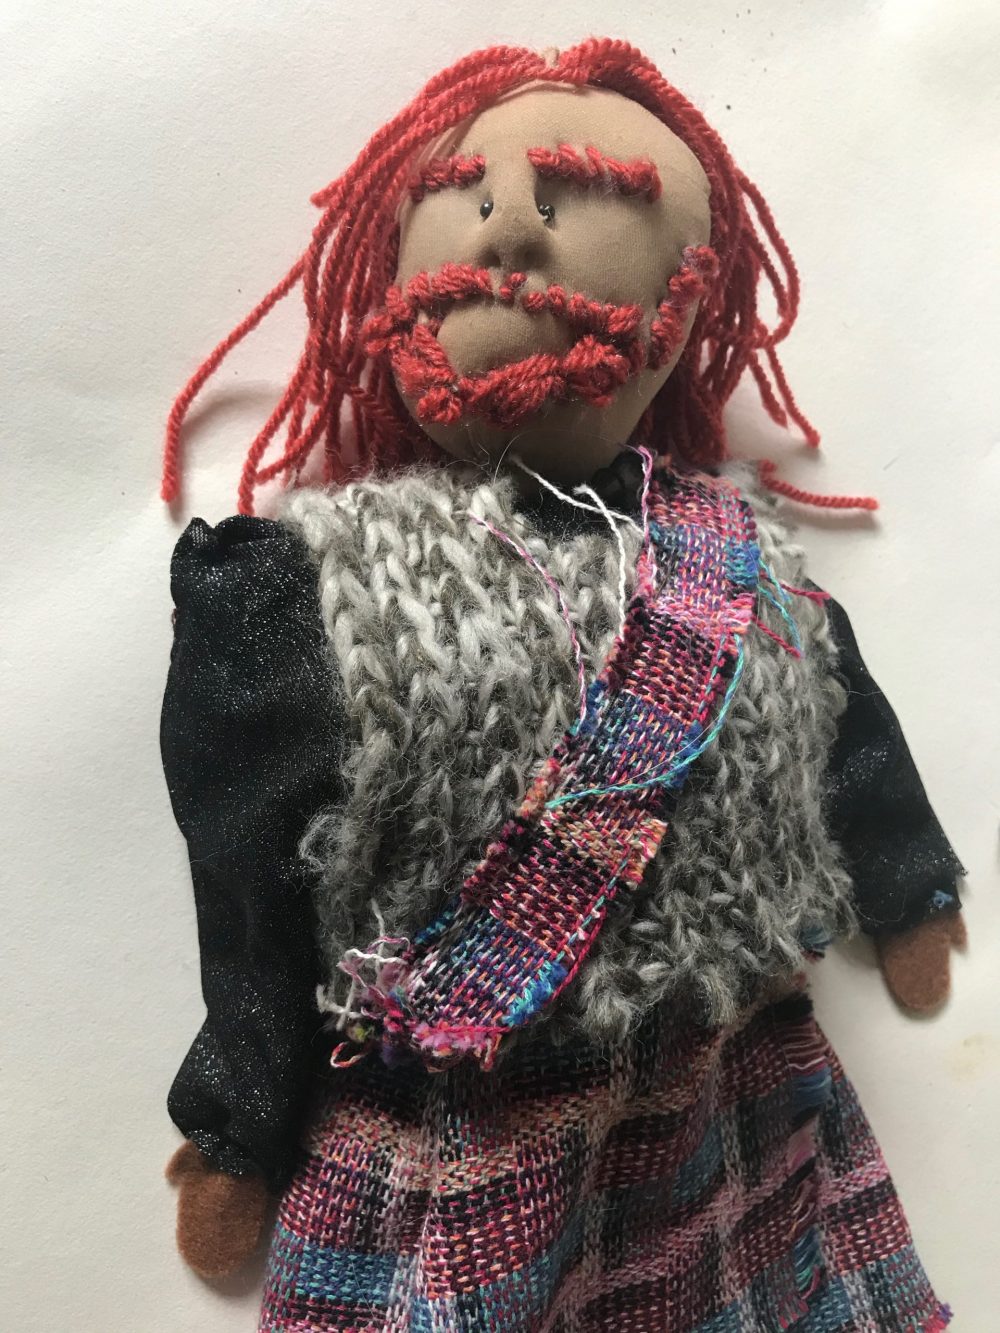 Puppet showing the hands